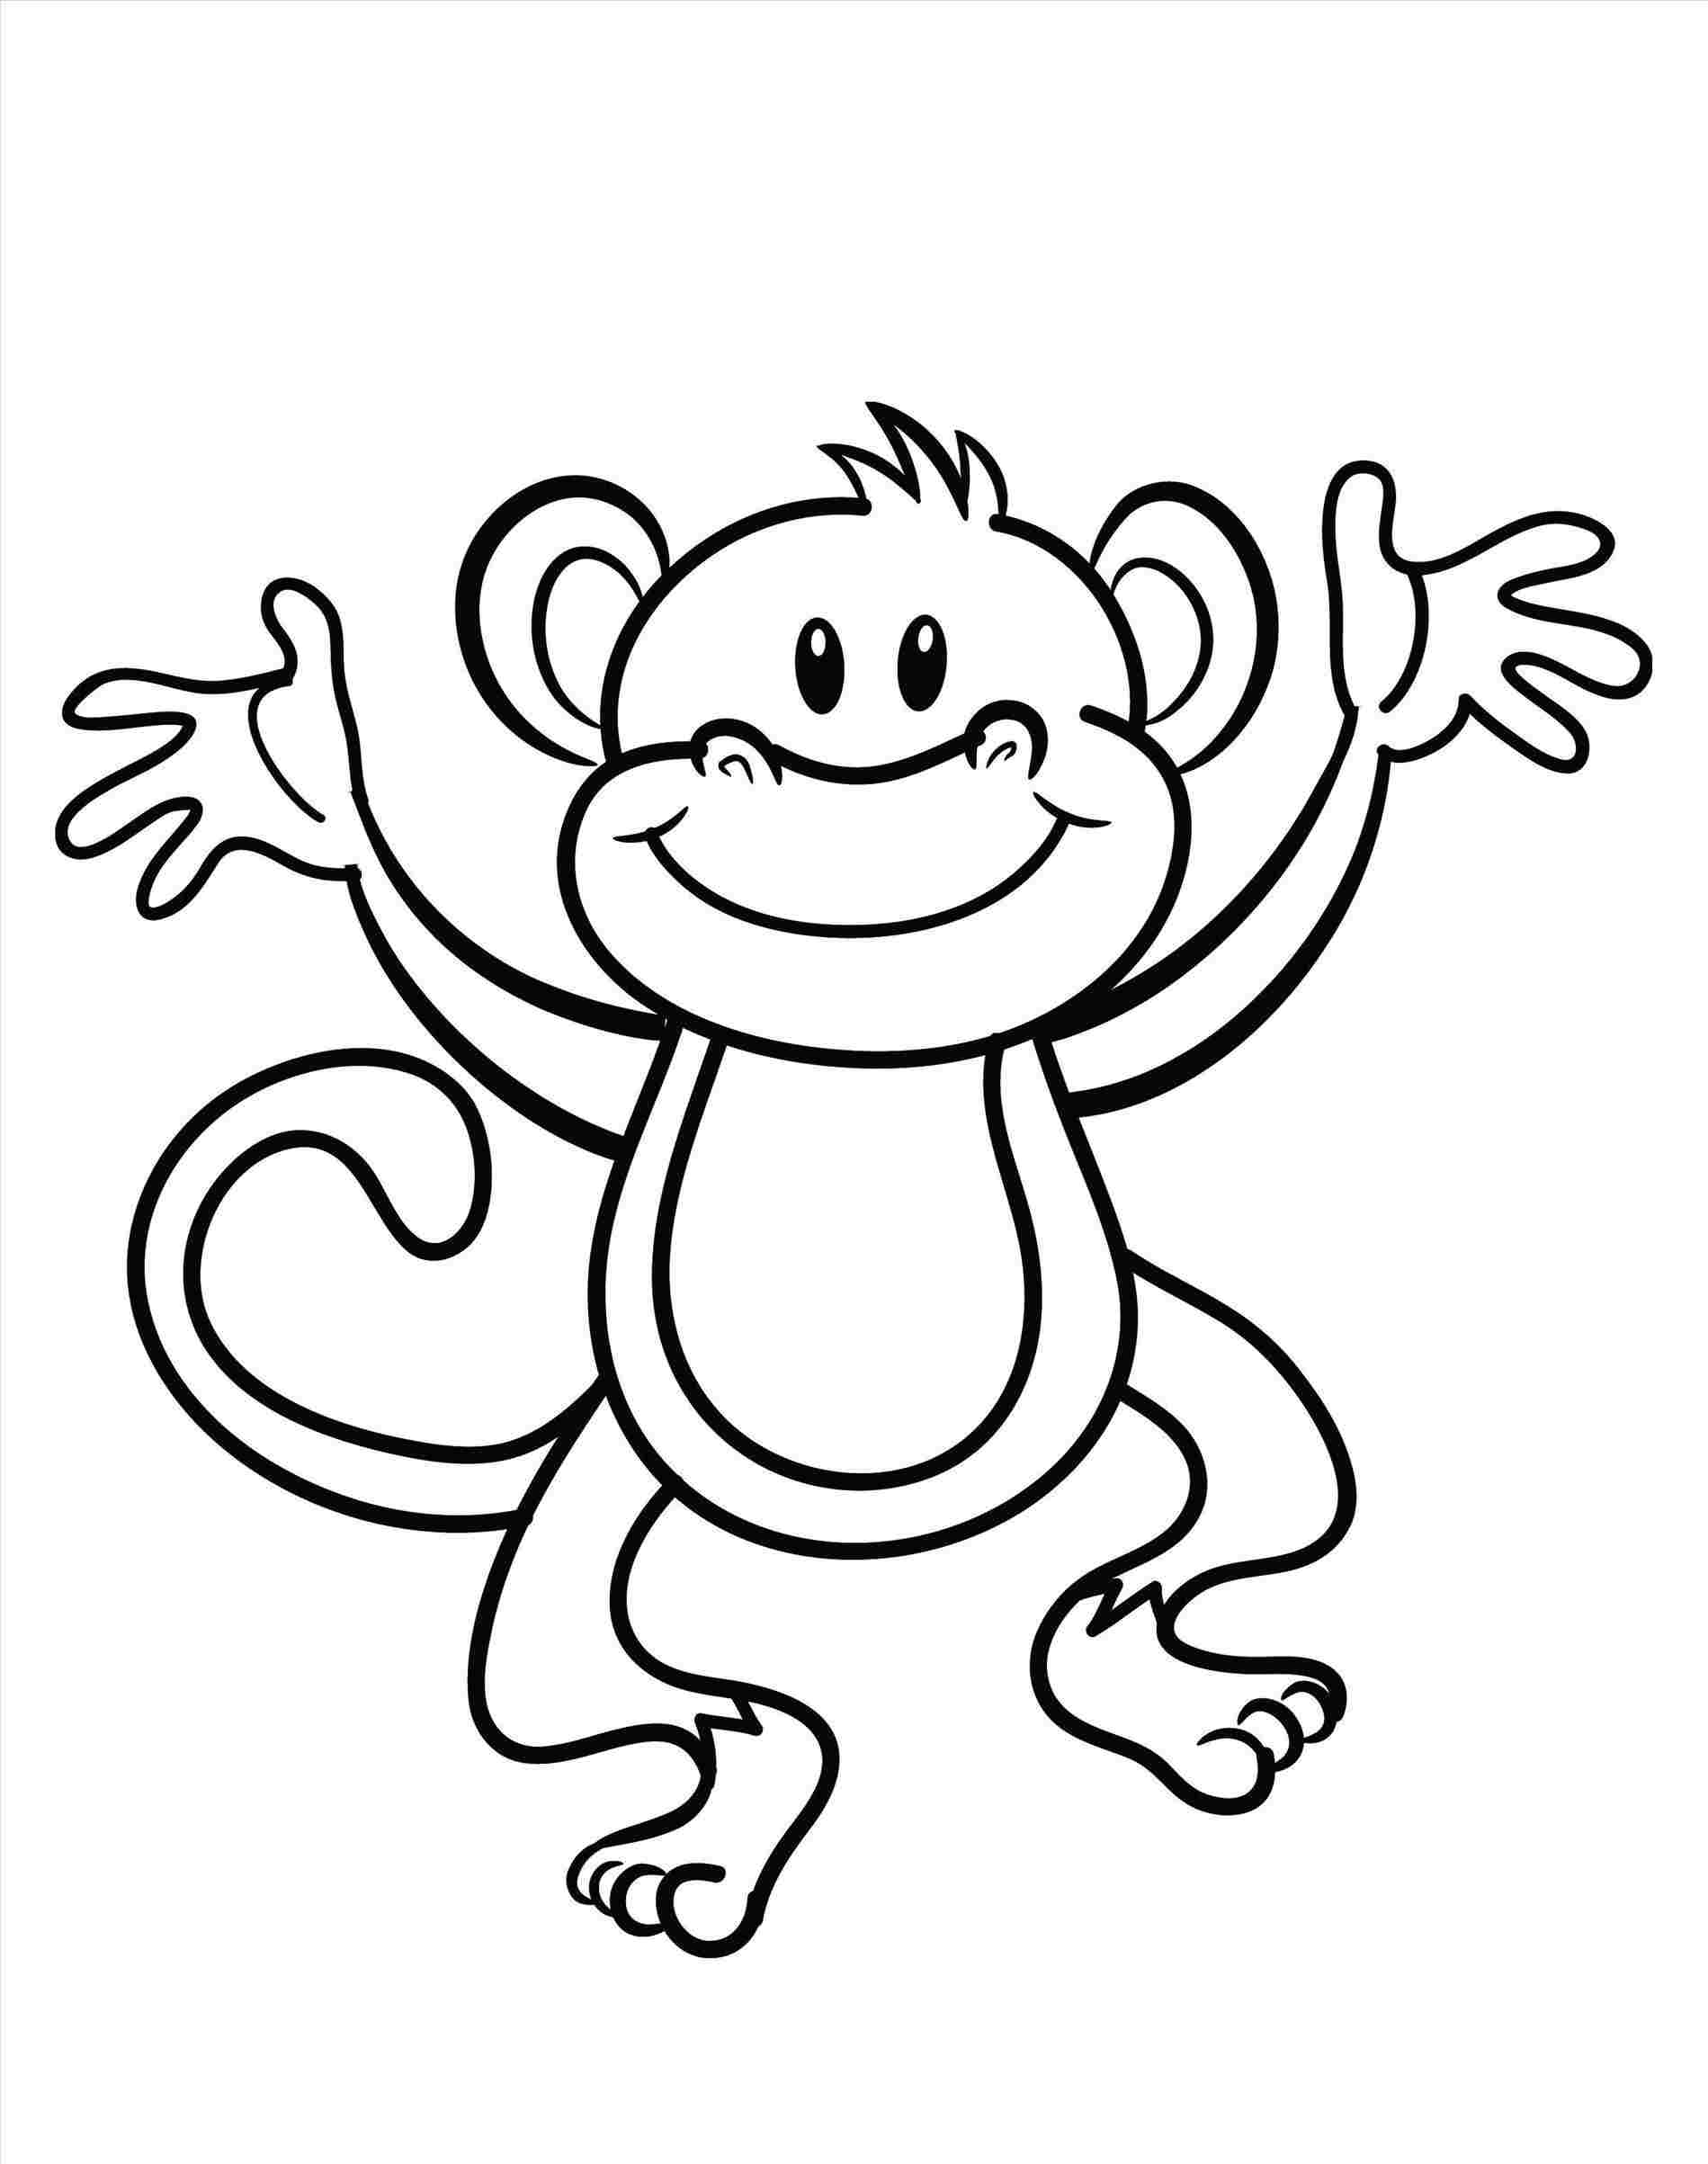 Simple Monkey Drawing | Free download on ClipArtMag